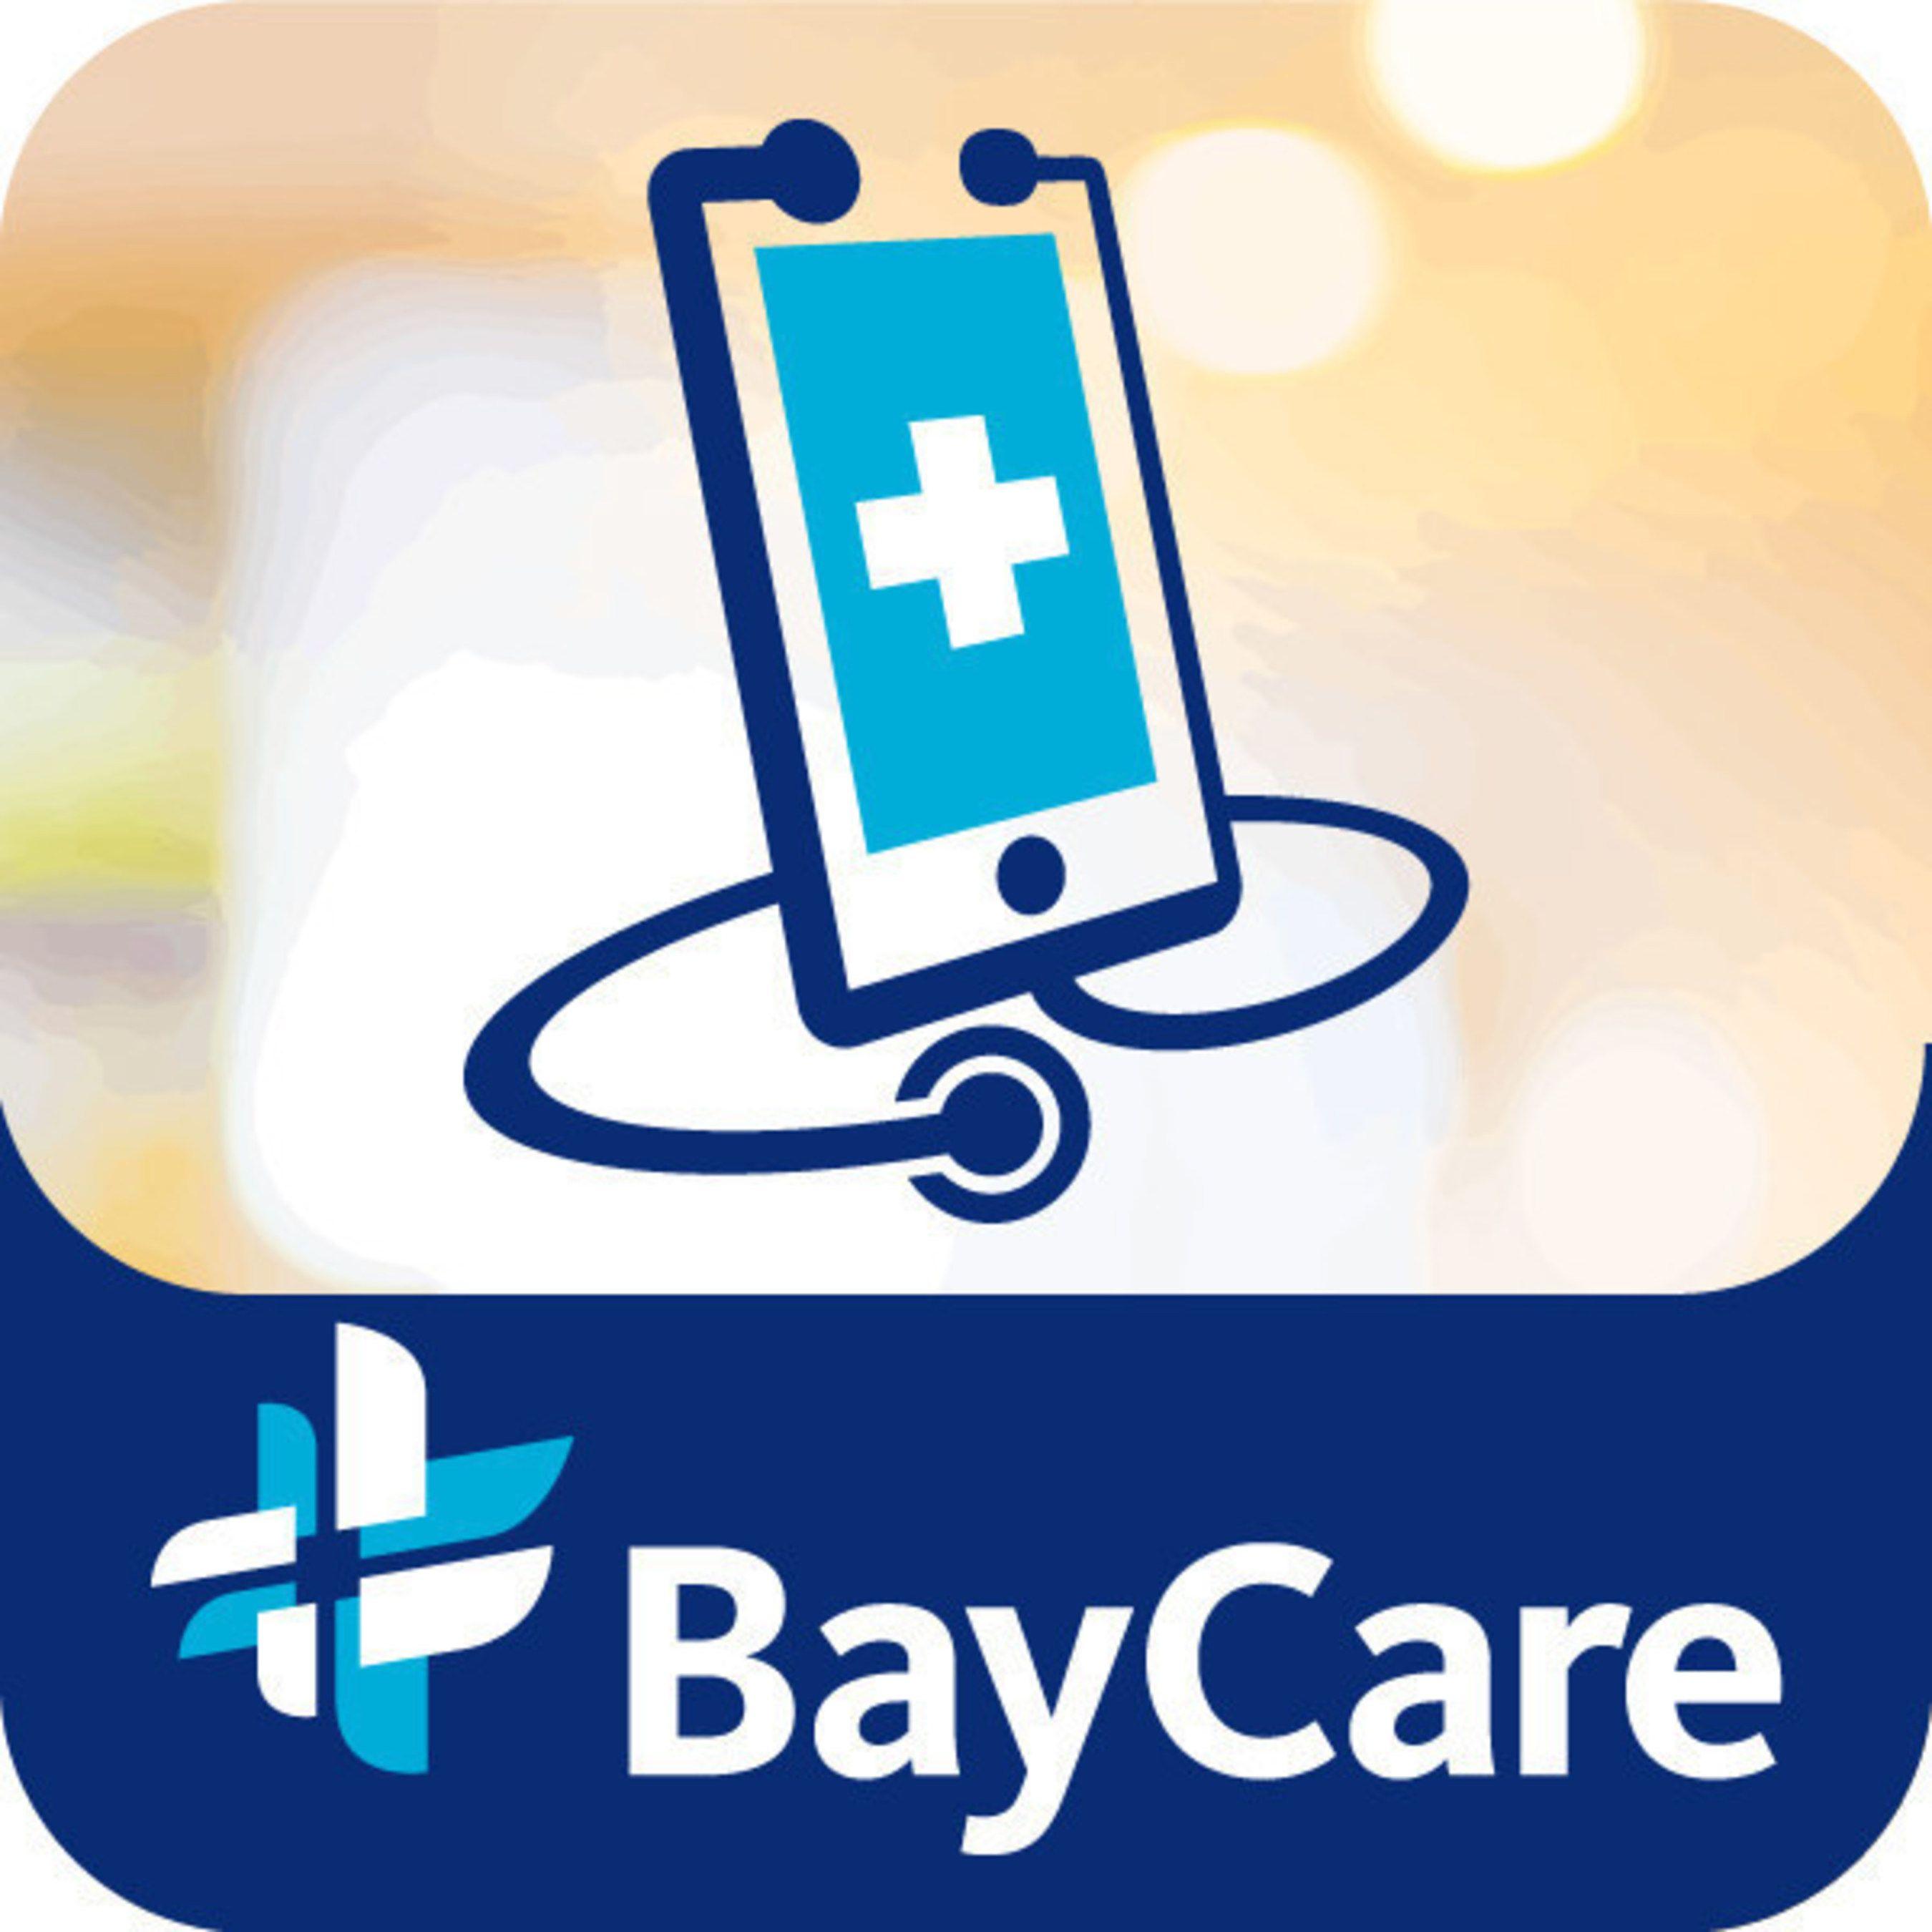 BayCare Logo - BayCare Continues to Use Technology to Expand Access to Health Care